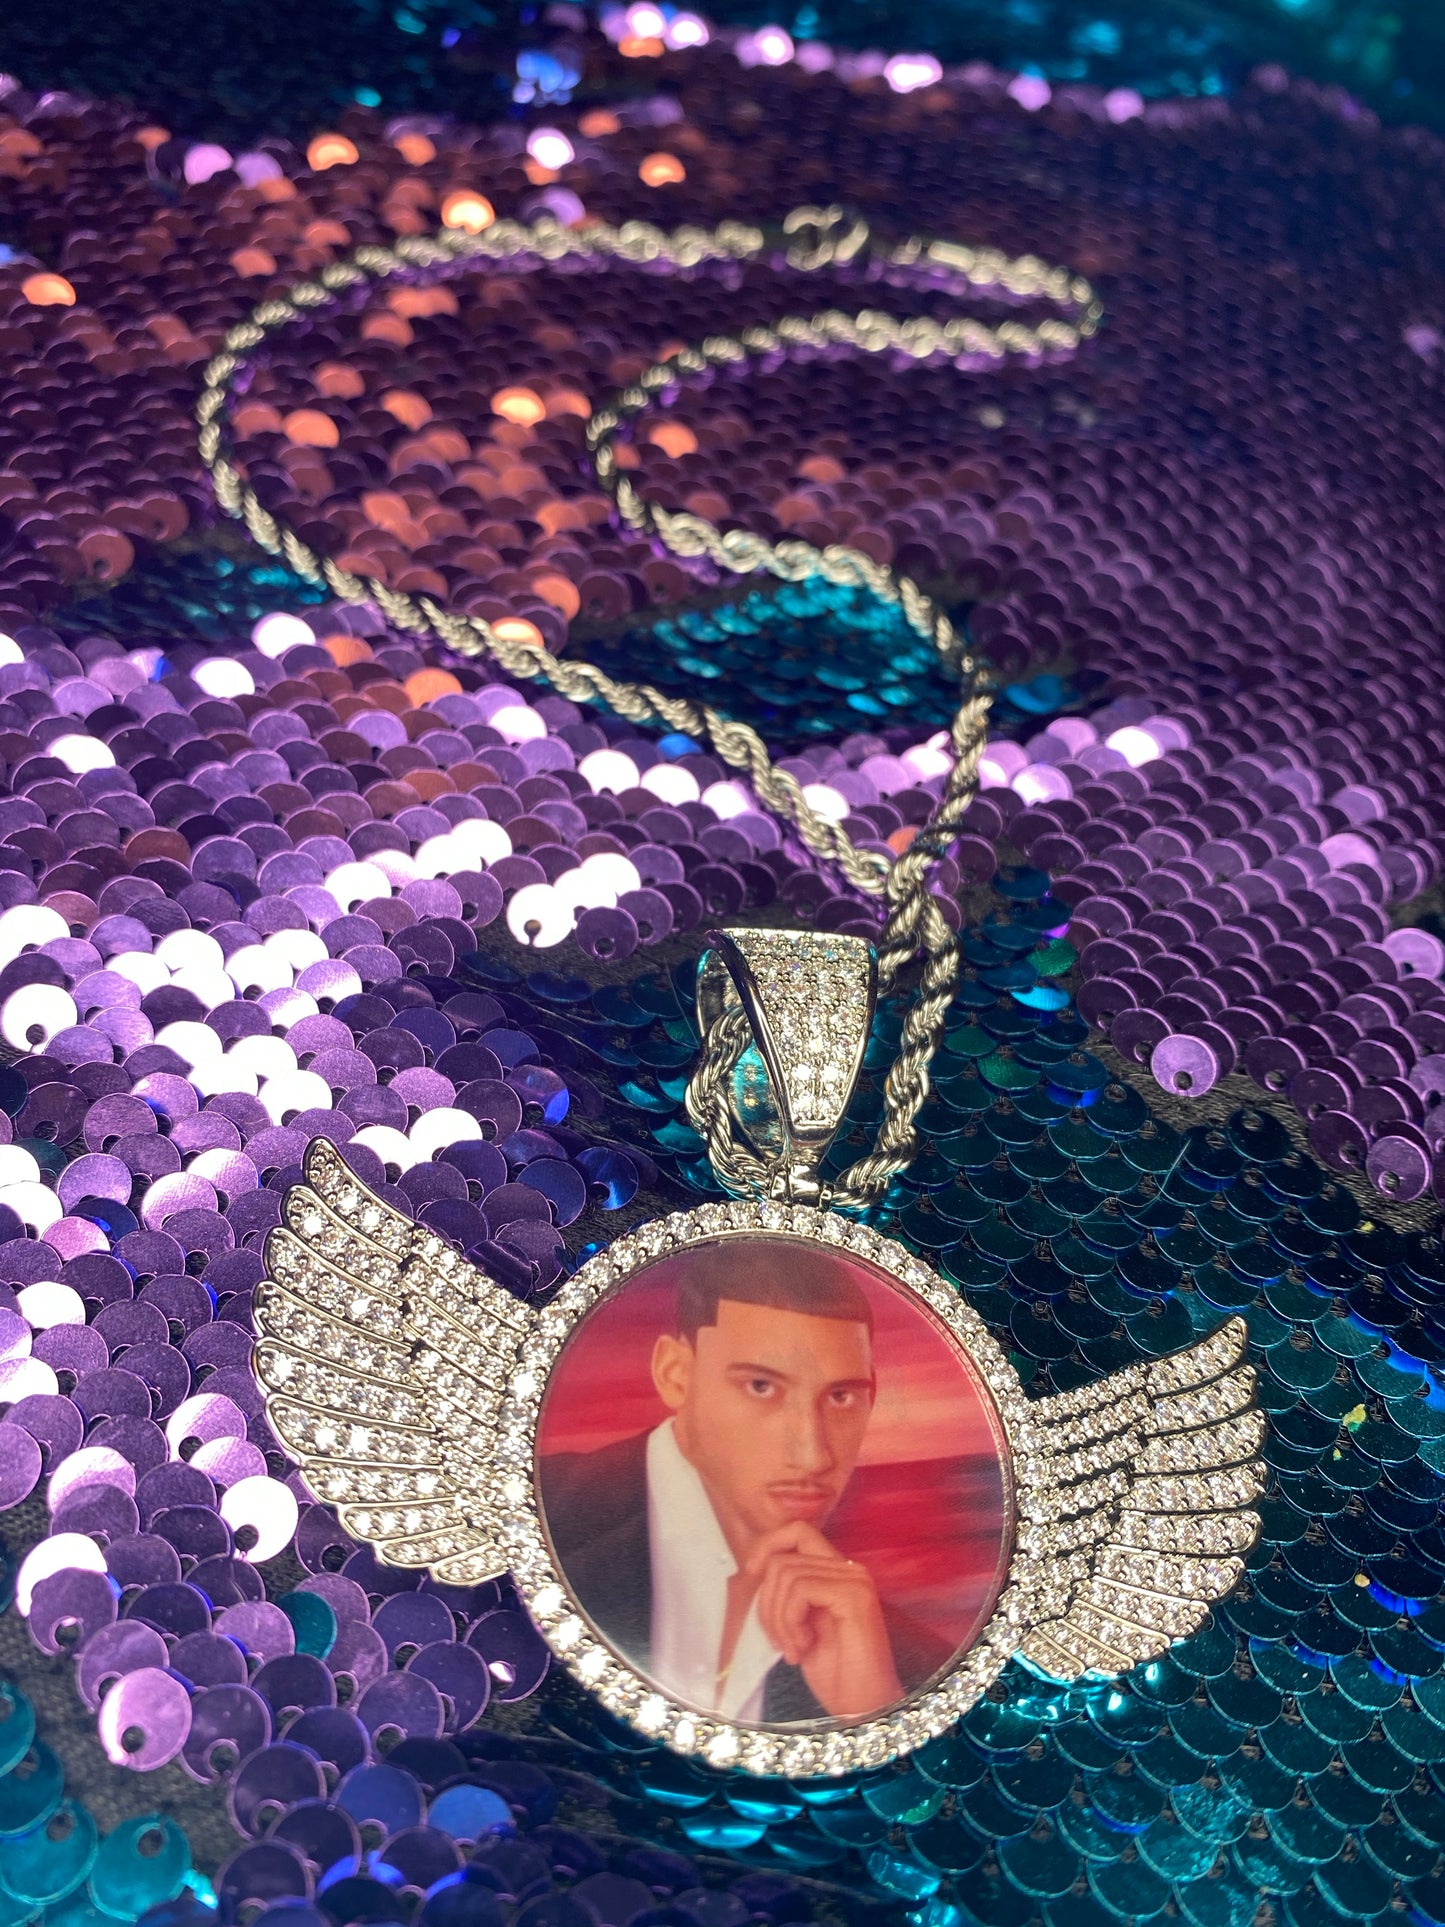 Personalized 18k Gold/Platinum Photo Pendant with Wings - Customizable and Unique Keepsake